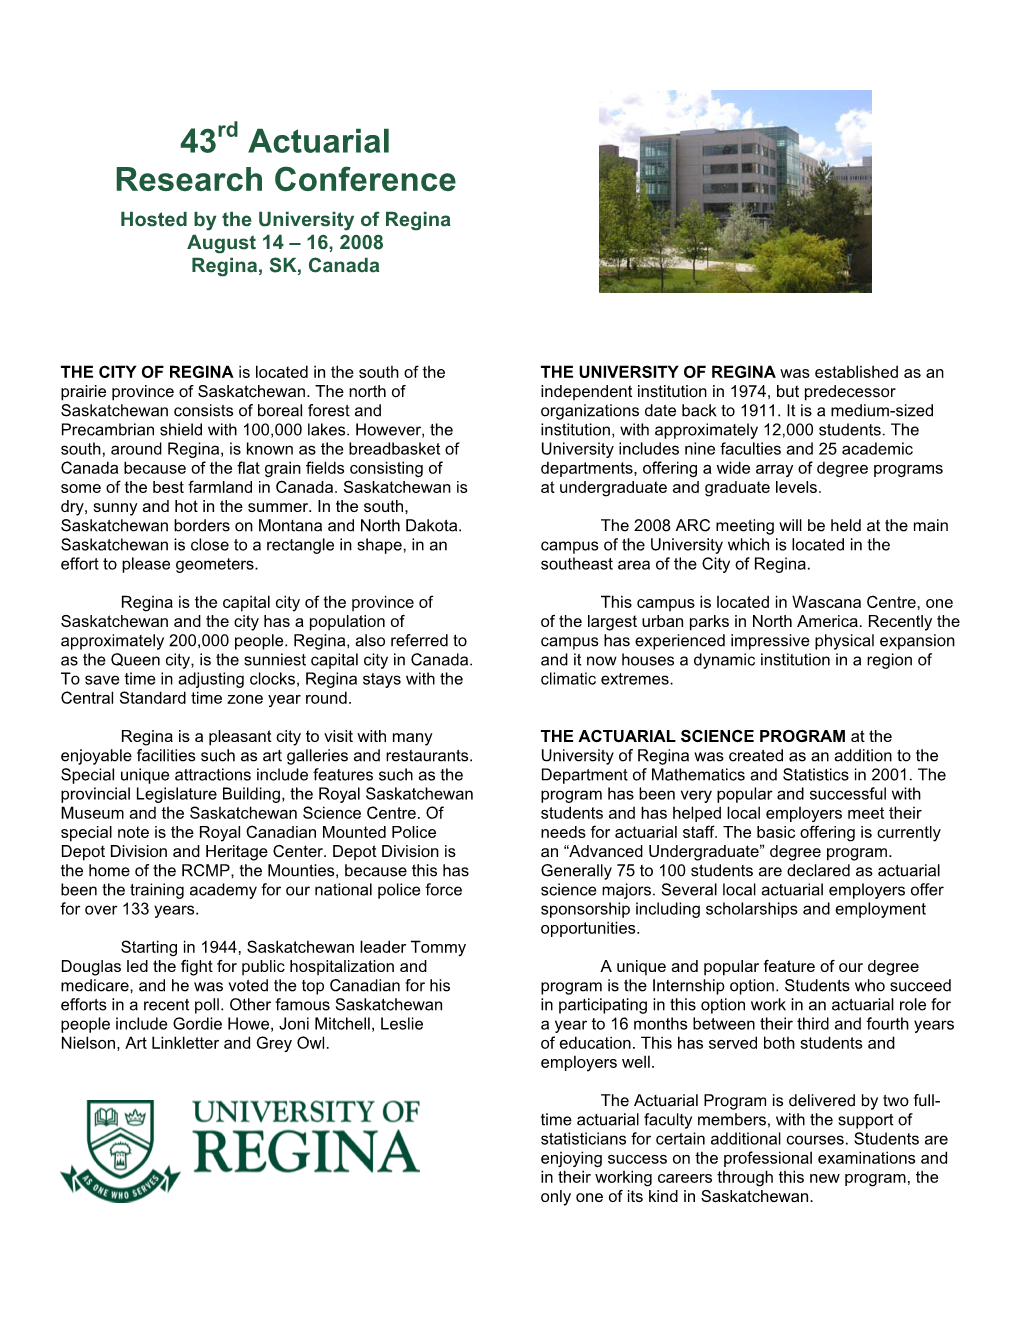 43Rd Actuarial Research Conference Hosted by the University of Regina August 14 – 16, 2008 Regina, SK, Canada